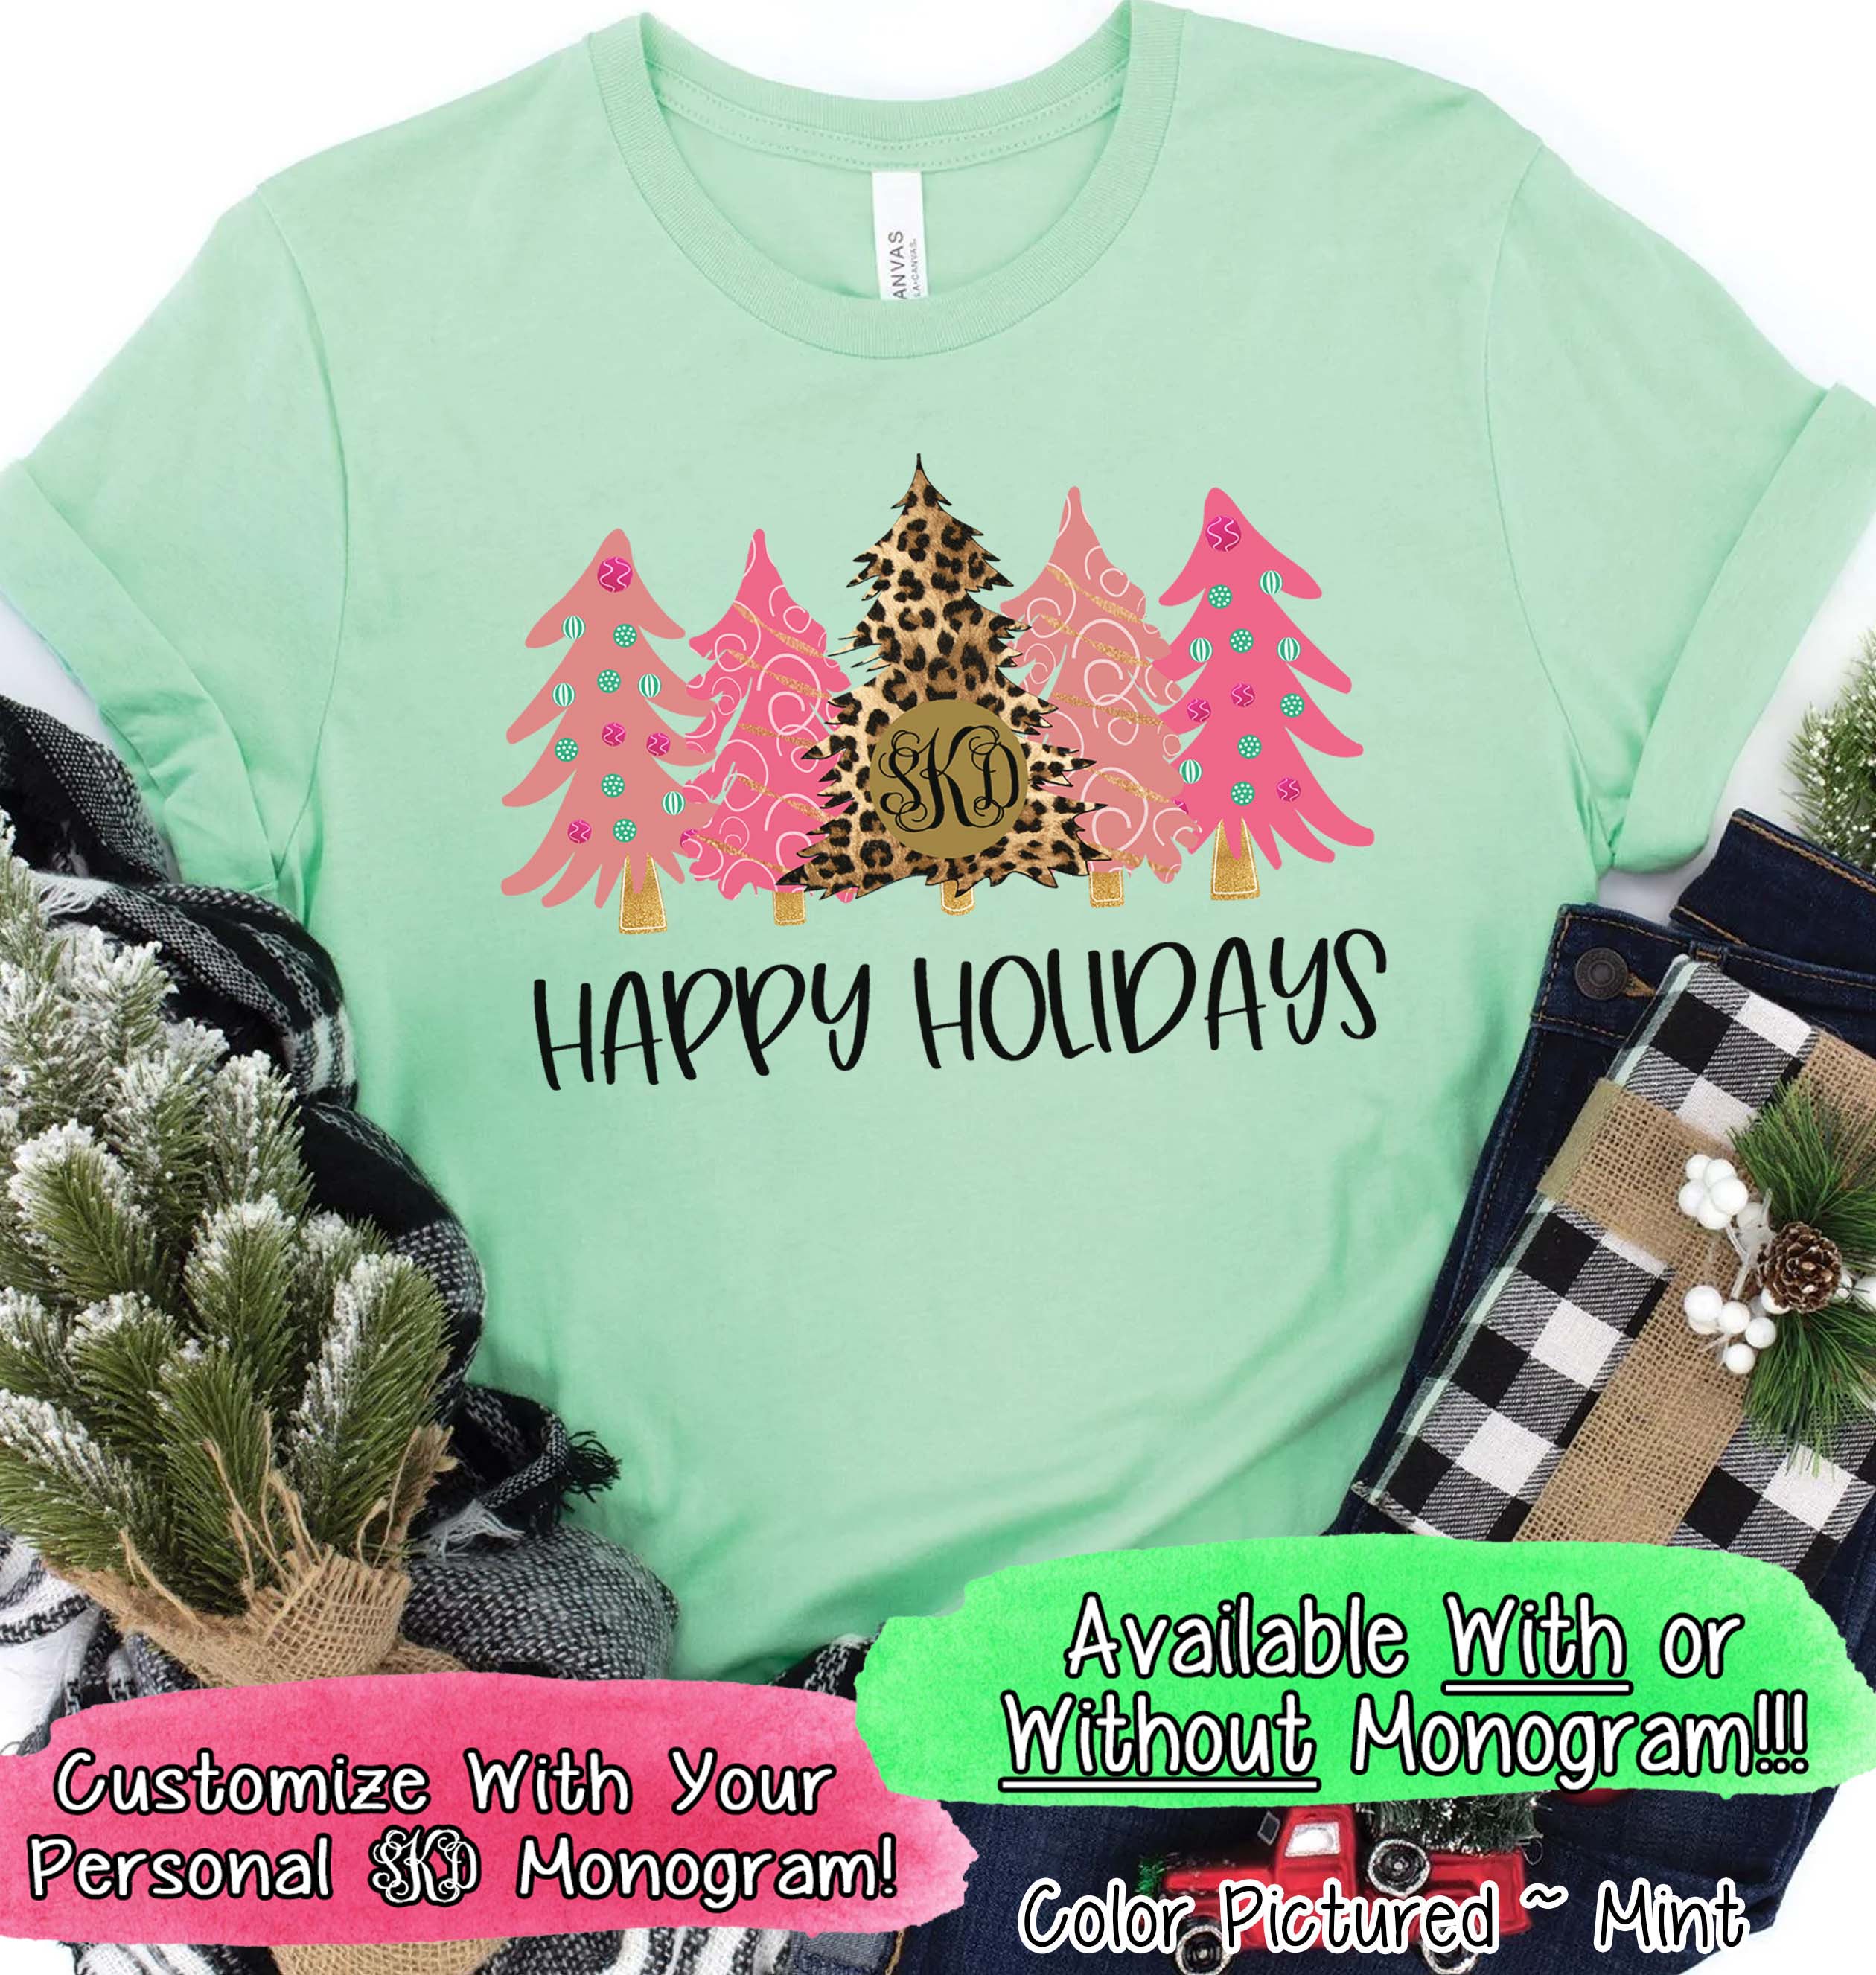 Monogrammed Leopard and Pink Christmas Trees Tee